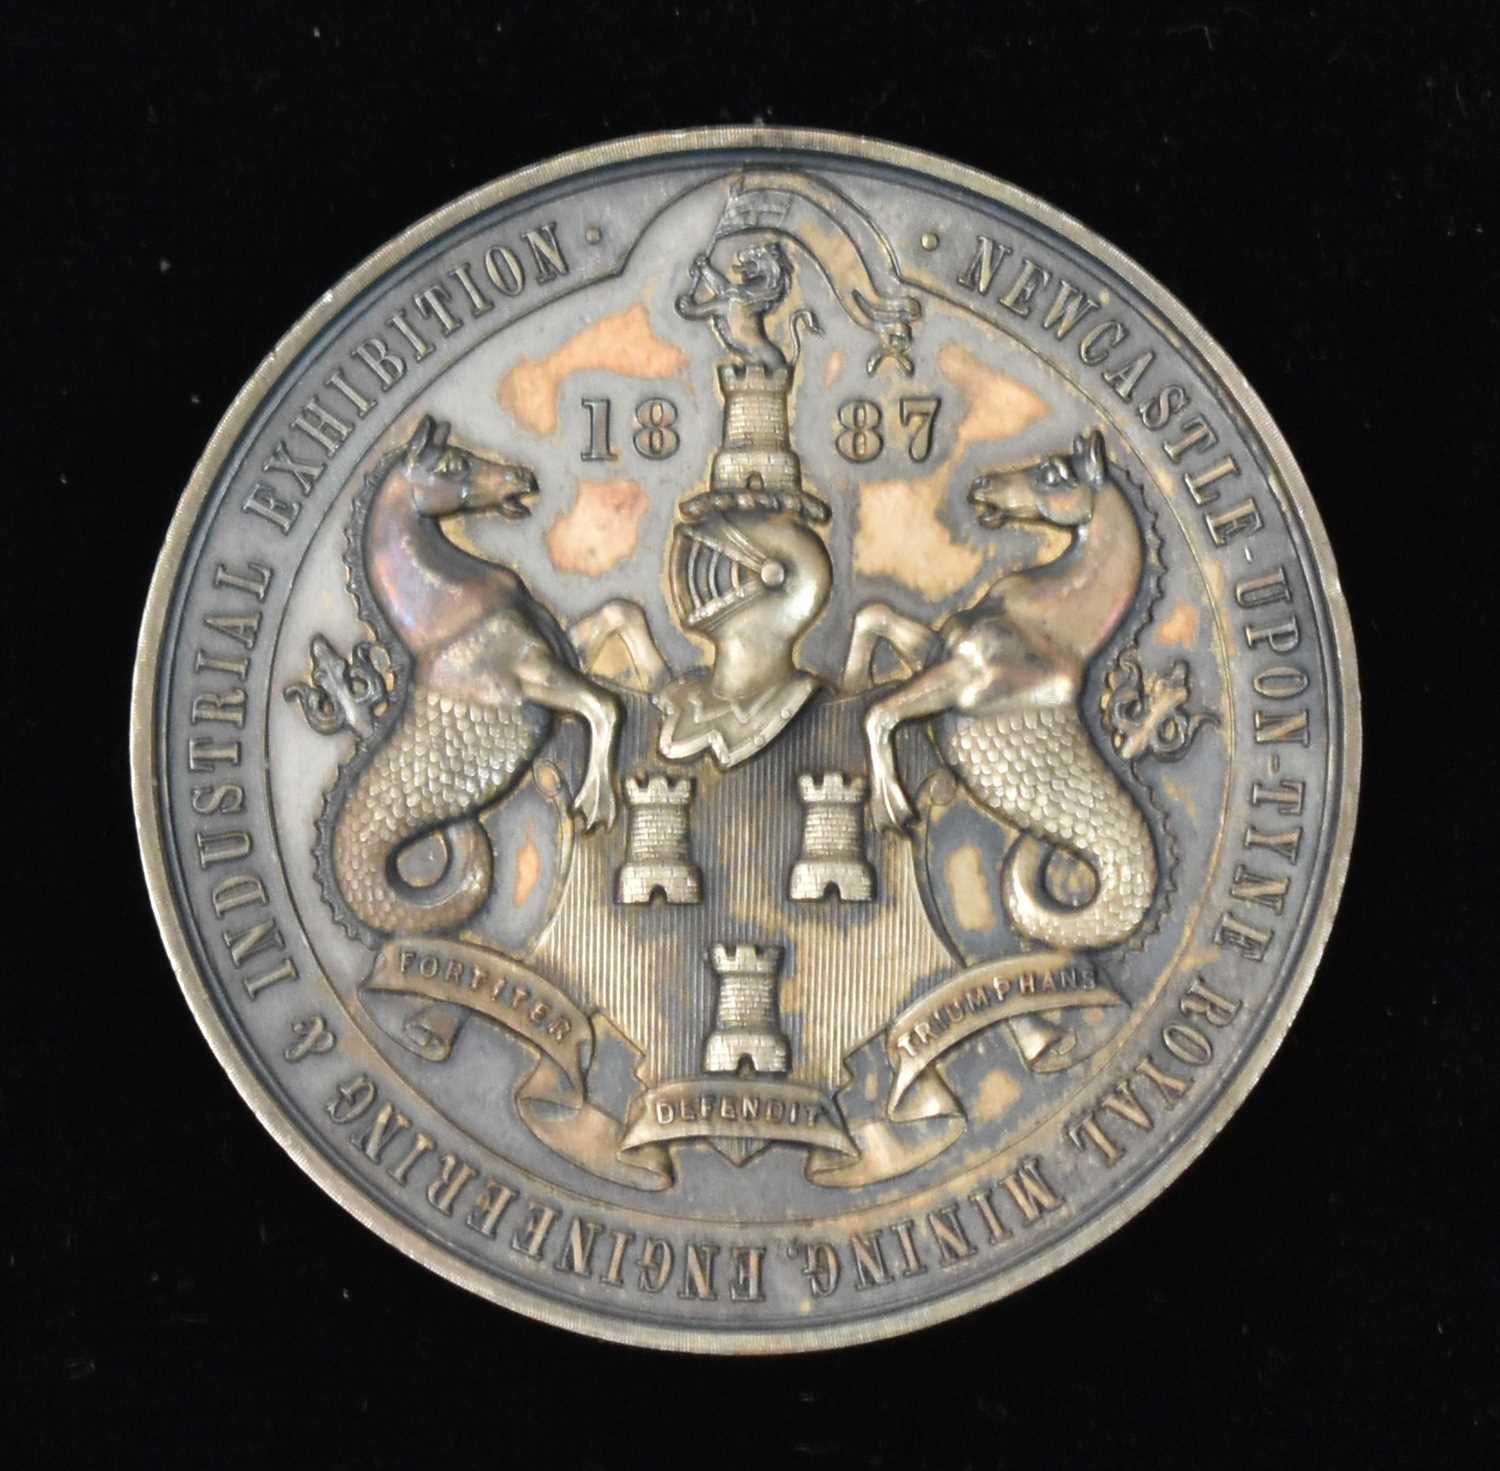 Lot 1835 - Newcastle Upon Tyne Royal Mining, Engineering & Industrial Exhibition medallion